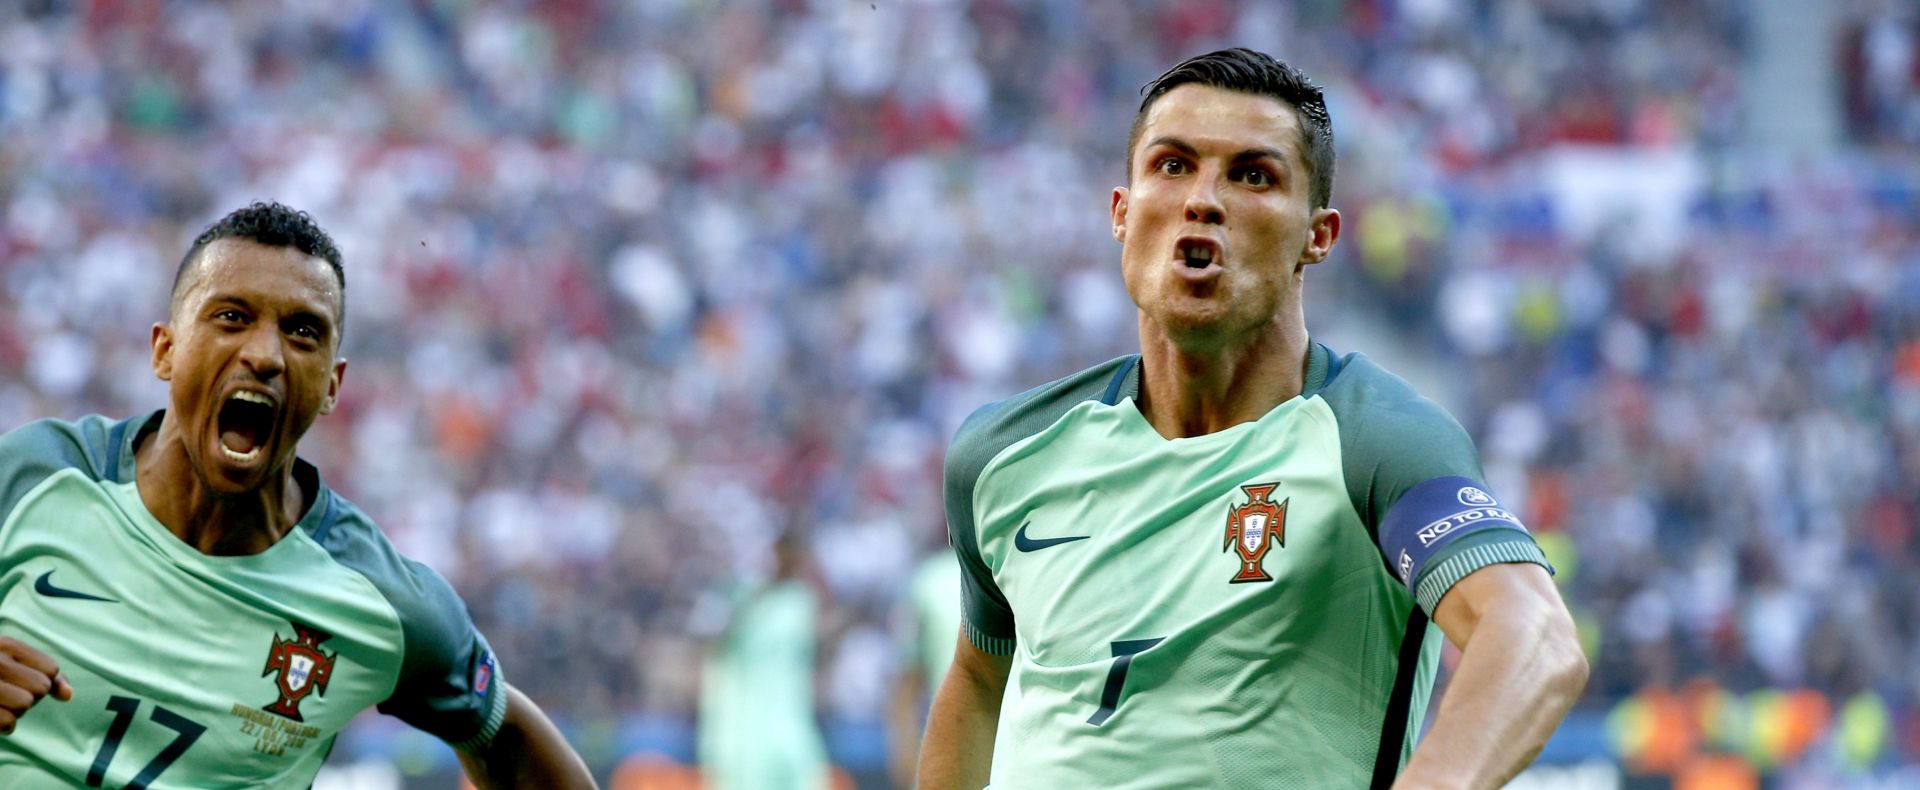 epa05384000 Cristiano Ronaldo of Portugal (R) celebrates scoring the 2-2 with Nani during the UEFA EURO 2016 group F preliminary round match between Hungary and Portugal at Stade de Lyon in Lyon, France, 22 June 2016.


(RESTRICTIONS APPLY: For editorial news reporting purposes only. Not used for commercial or marketing purposes without prior written approval of UEFA. Images must appear as still images and must not emulate match action video footage. Photographs published in online publications (whether via the Internet or otherwise) shall have an interval of at least 20 seconds between the posting.)  EPA/ROBERT GHEMENT   EDITORIAL USE ONLY